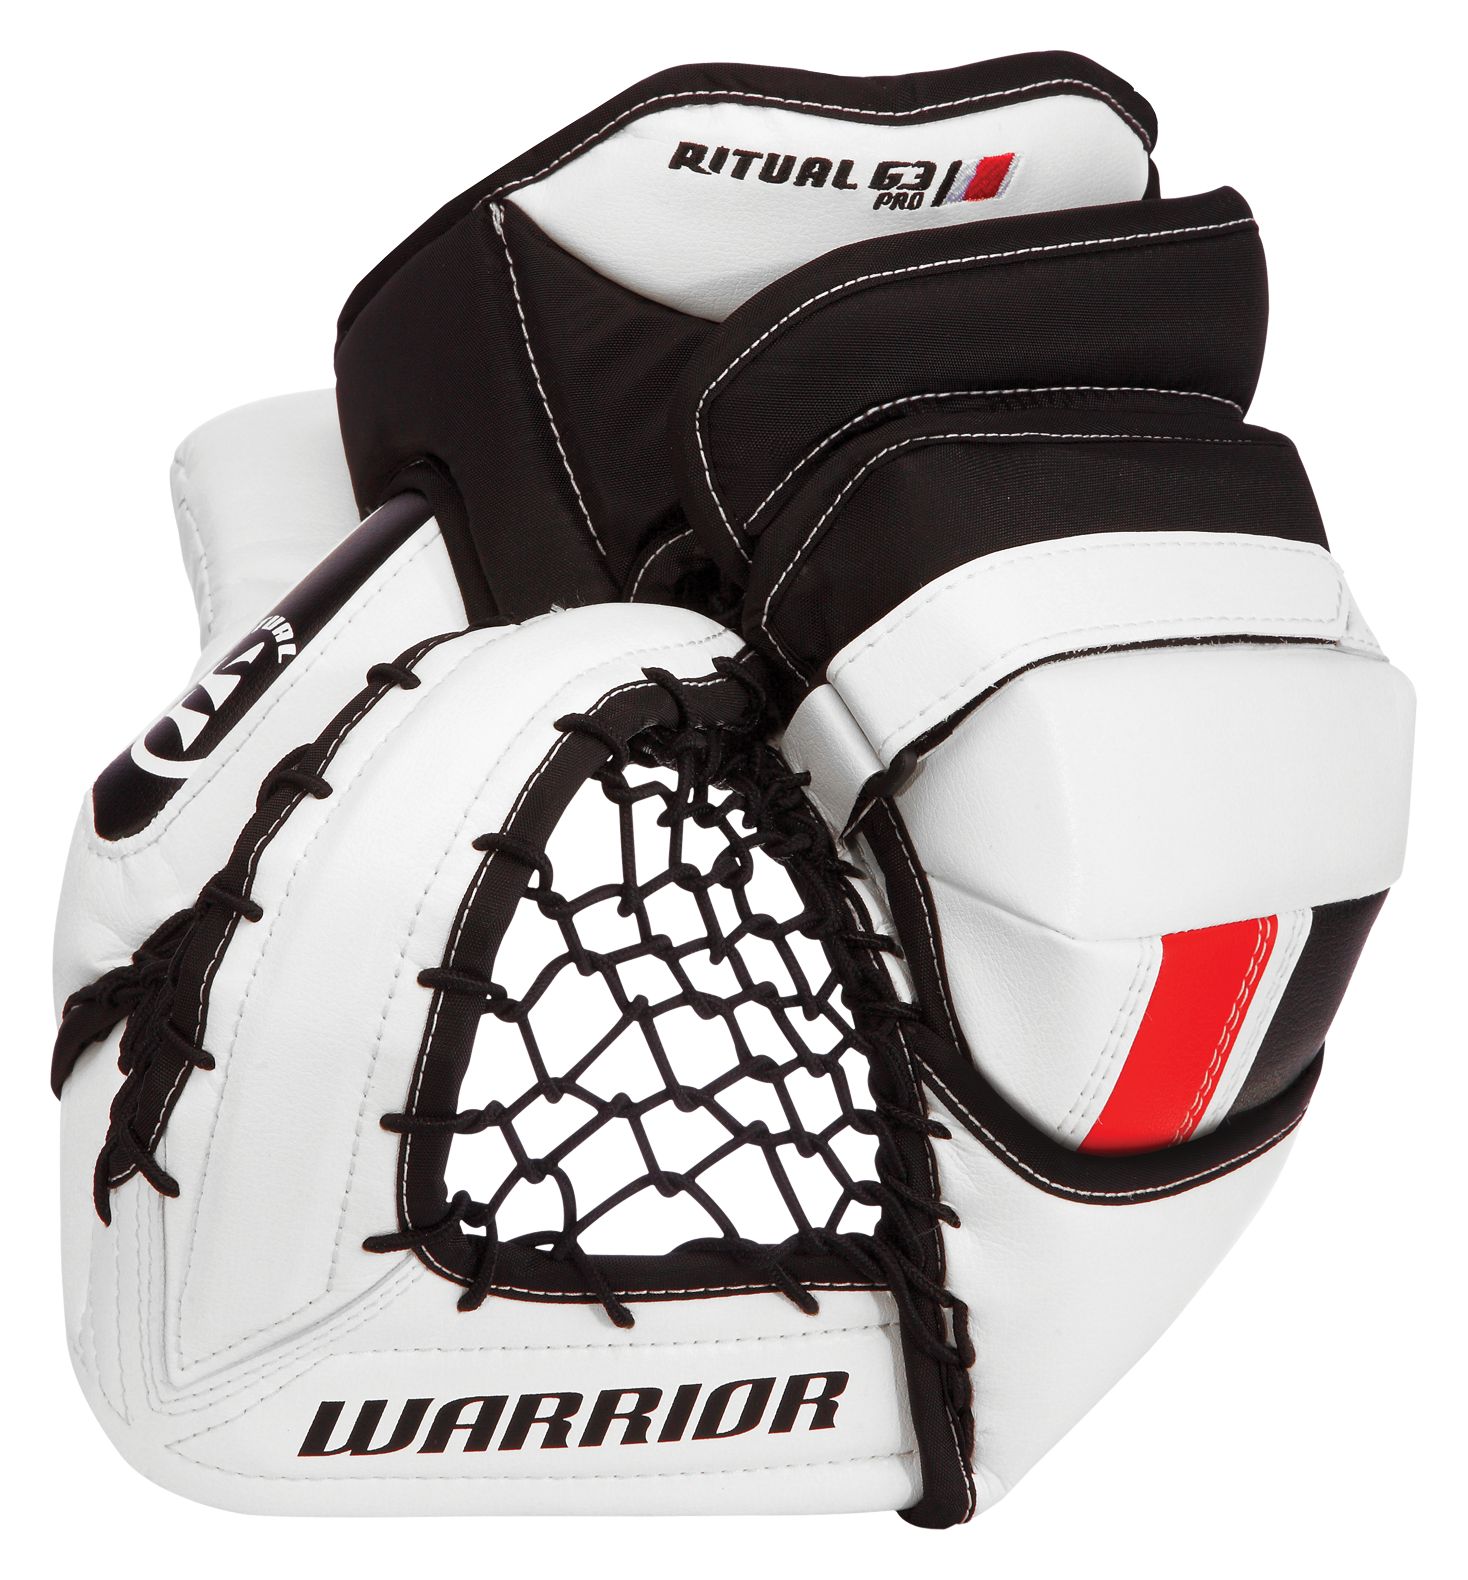 Ritual G3 Pro Trapper, White with Black & Red image number 1